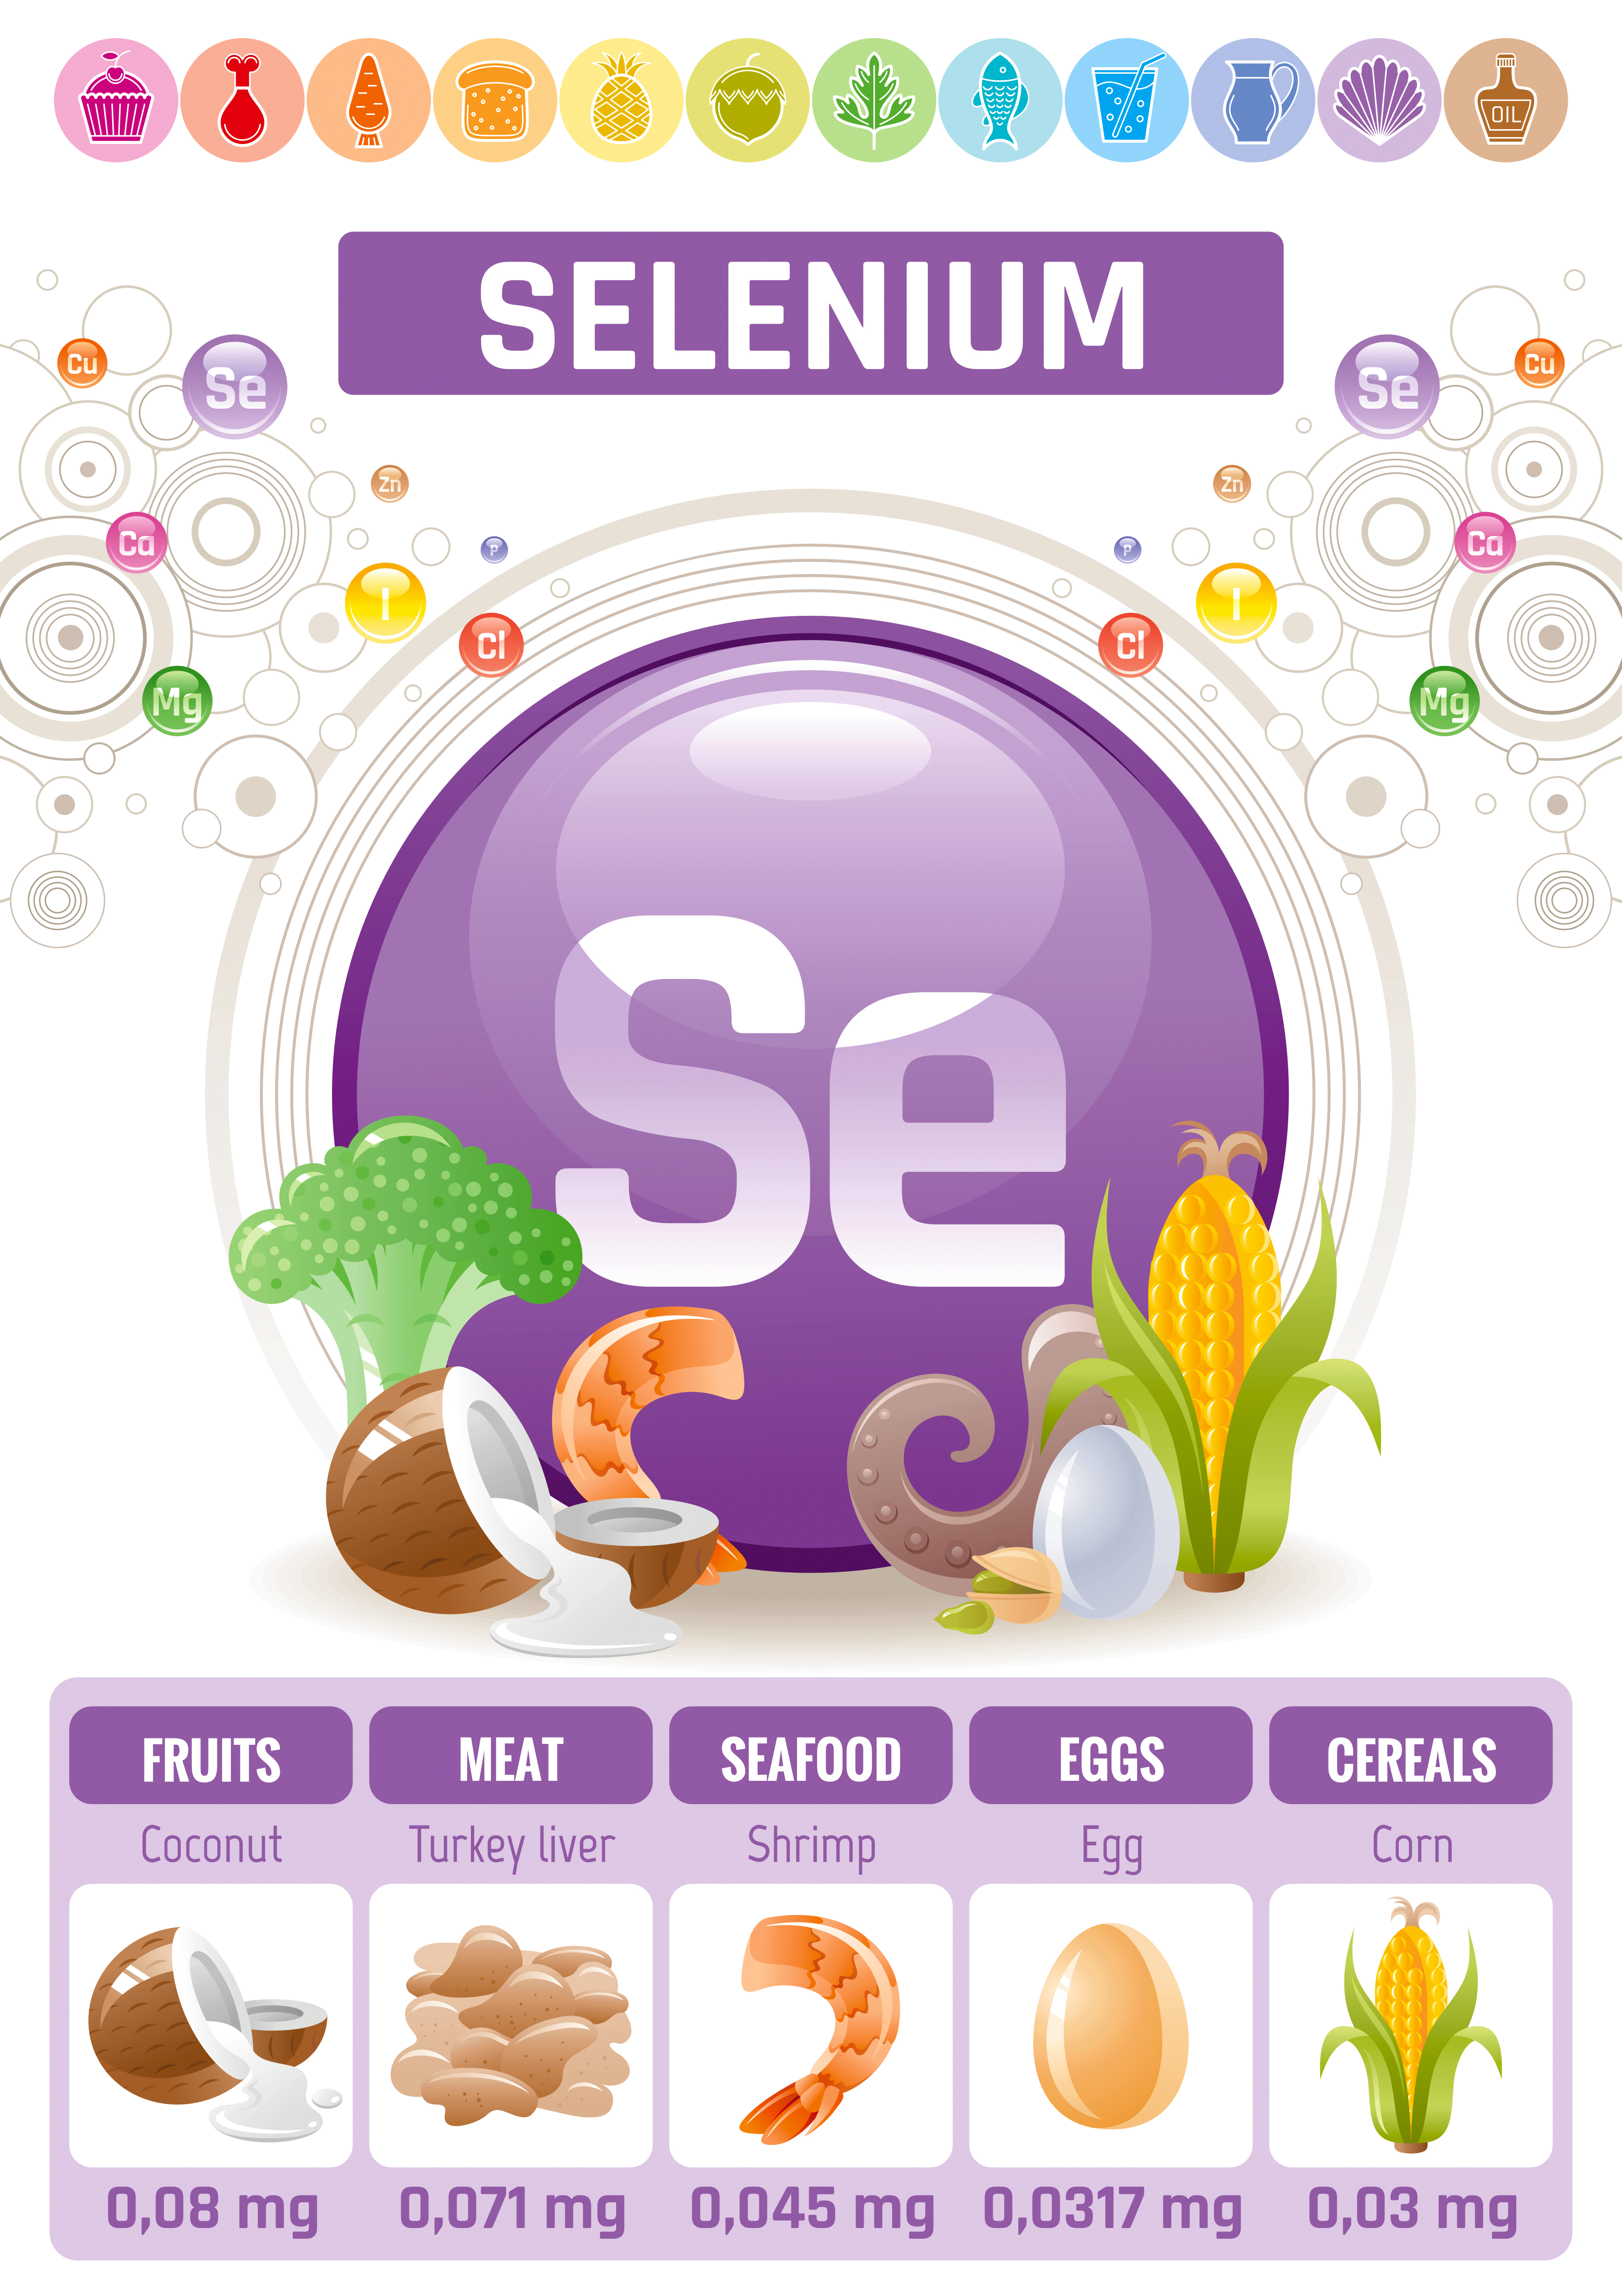 You don't know which food contains the most Selenium naturally? Now you know!